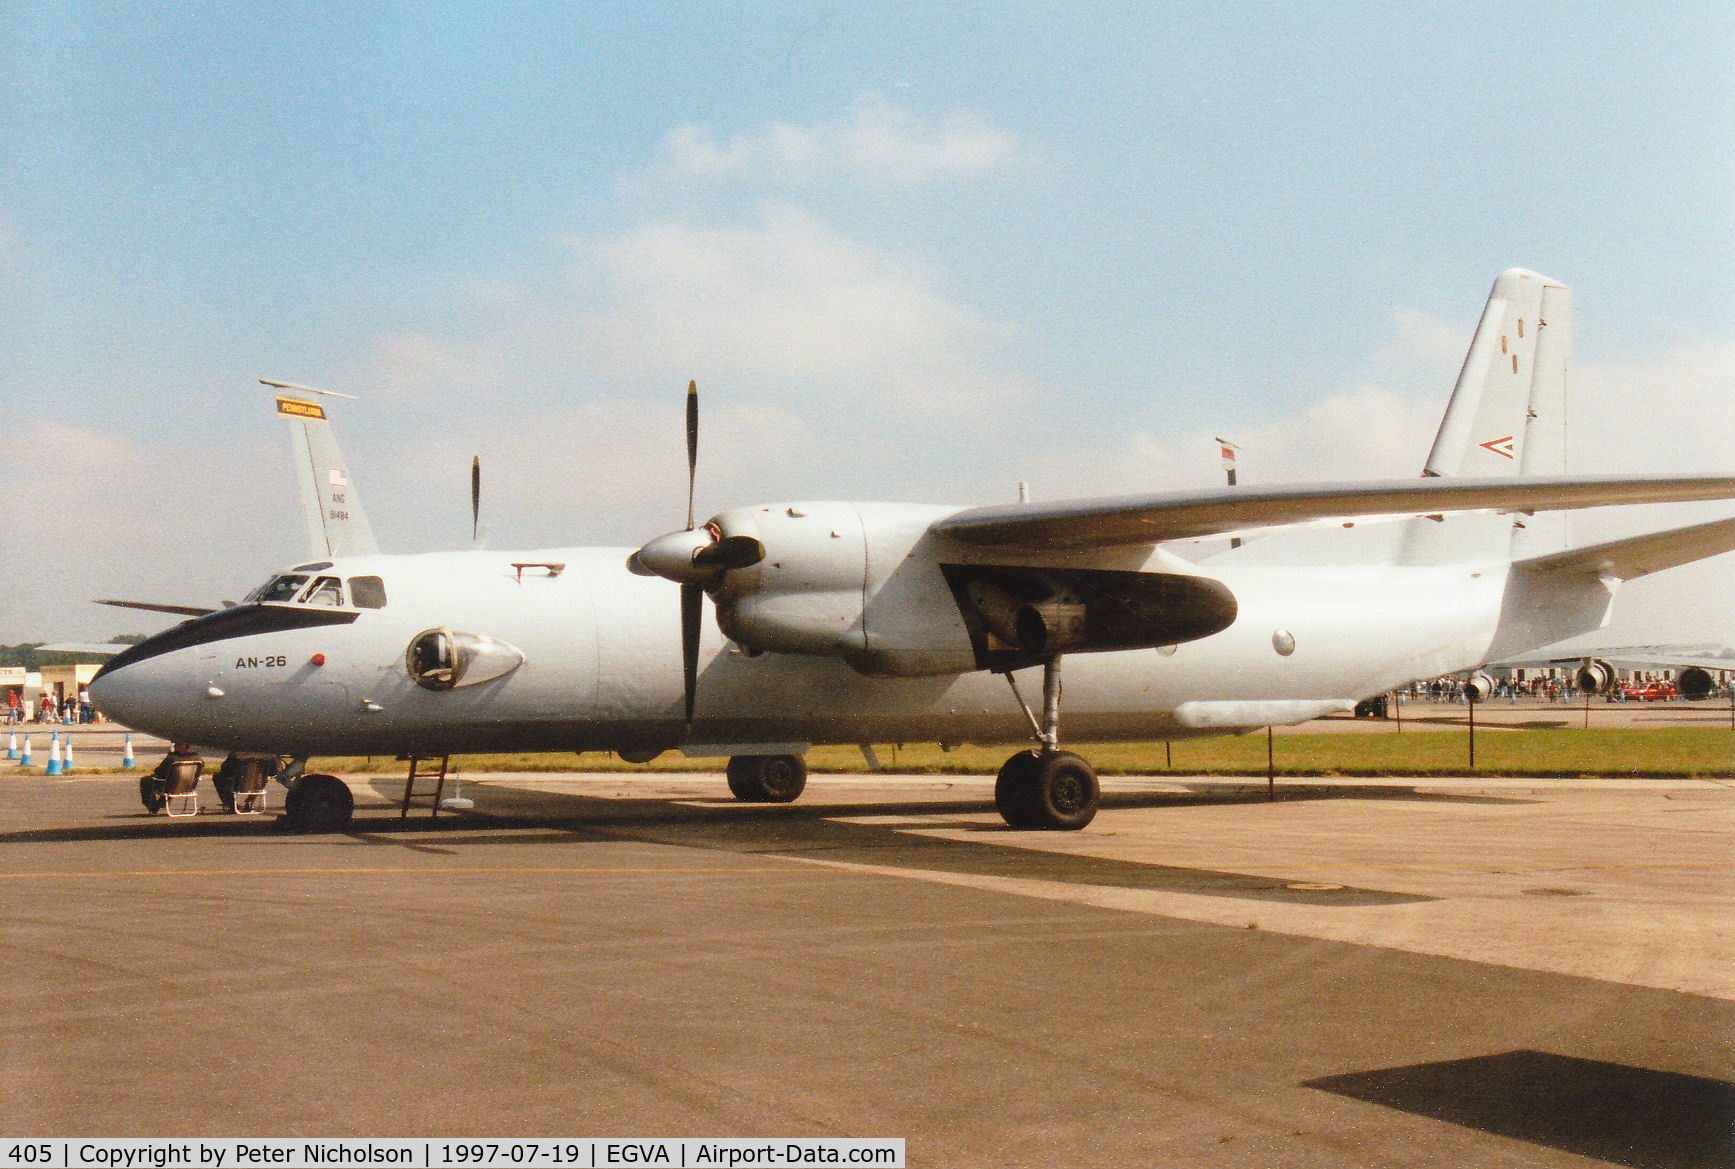 405, Antonov An-26 C/N 717900, An-26 Curl,  callsign 3405, of the Hungarian Air Force on display at the 1997 Intnl Air Tattoo at RAF Fairford.